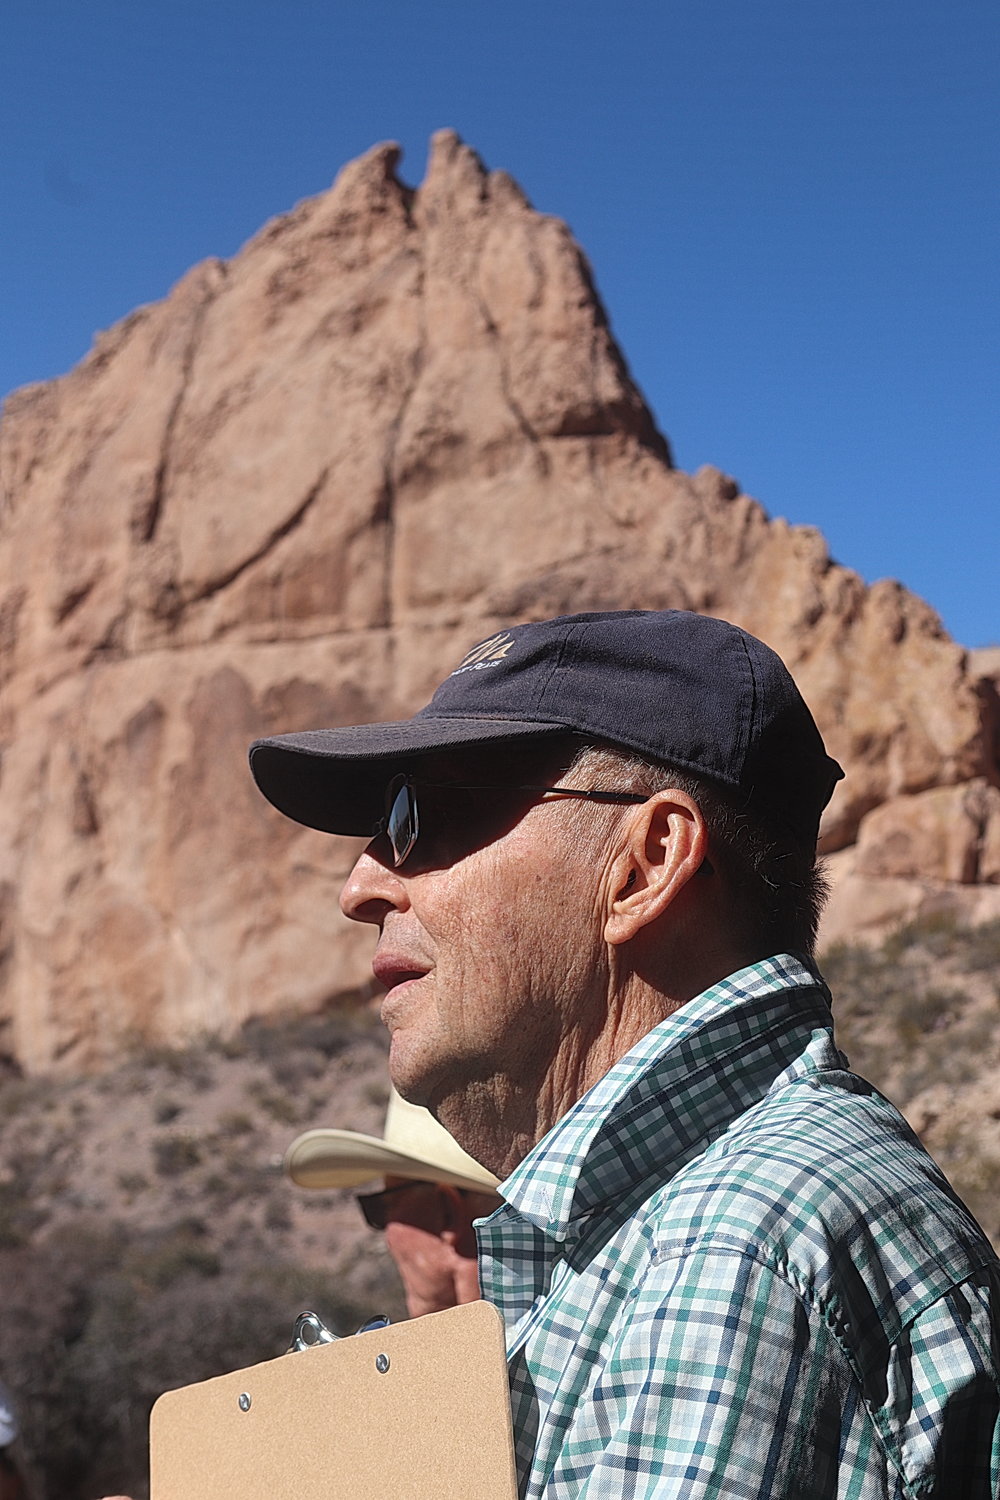 John Freyermuth, the leader of a Native Plant Society nature walk, pauses in front of La Cueva near the end of the walk.